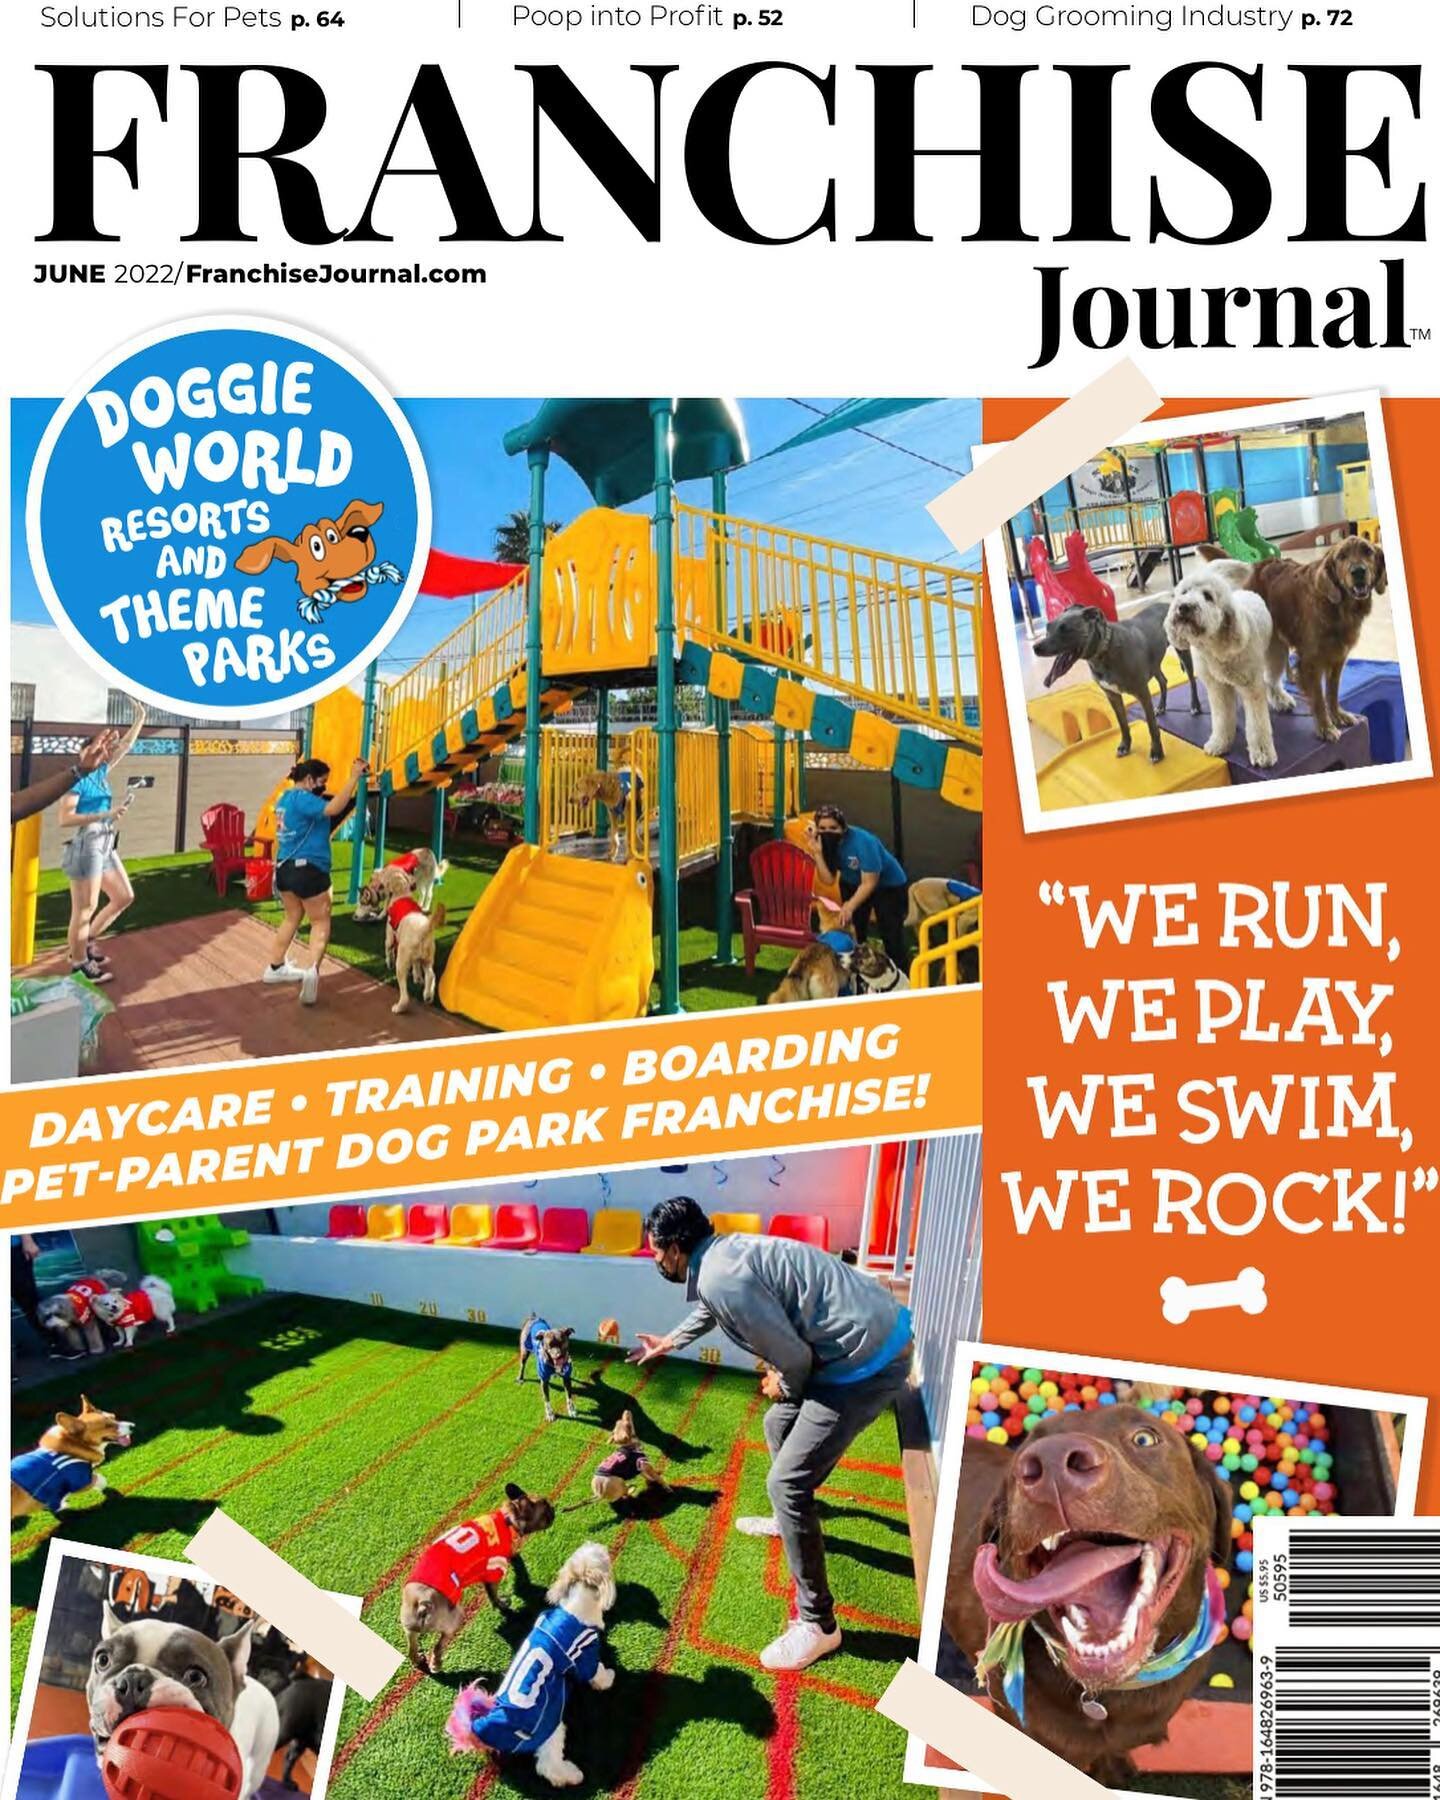 We are excited to announce 📣 that we have made the cover of the 
June 2022 Franchise Journal Pet Edition 📰 as their main story!! 

South Park Doggie Resorts &amp; Theme Parks is the hottest pet franchise concept in the industry! Truly leaving our p